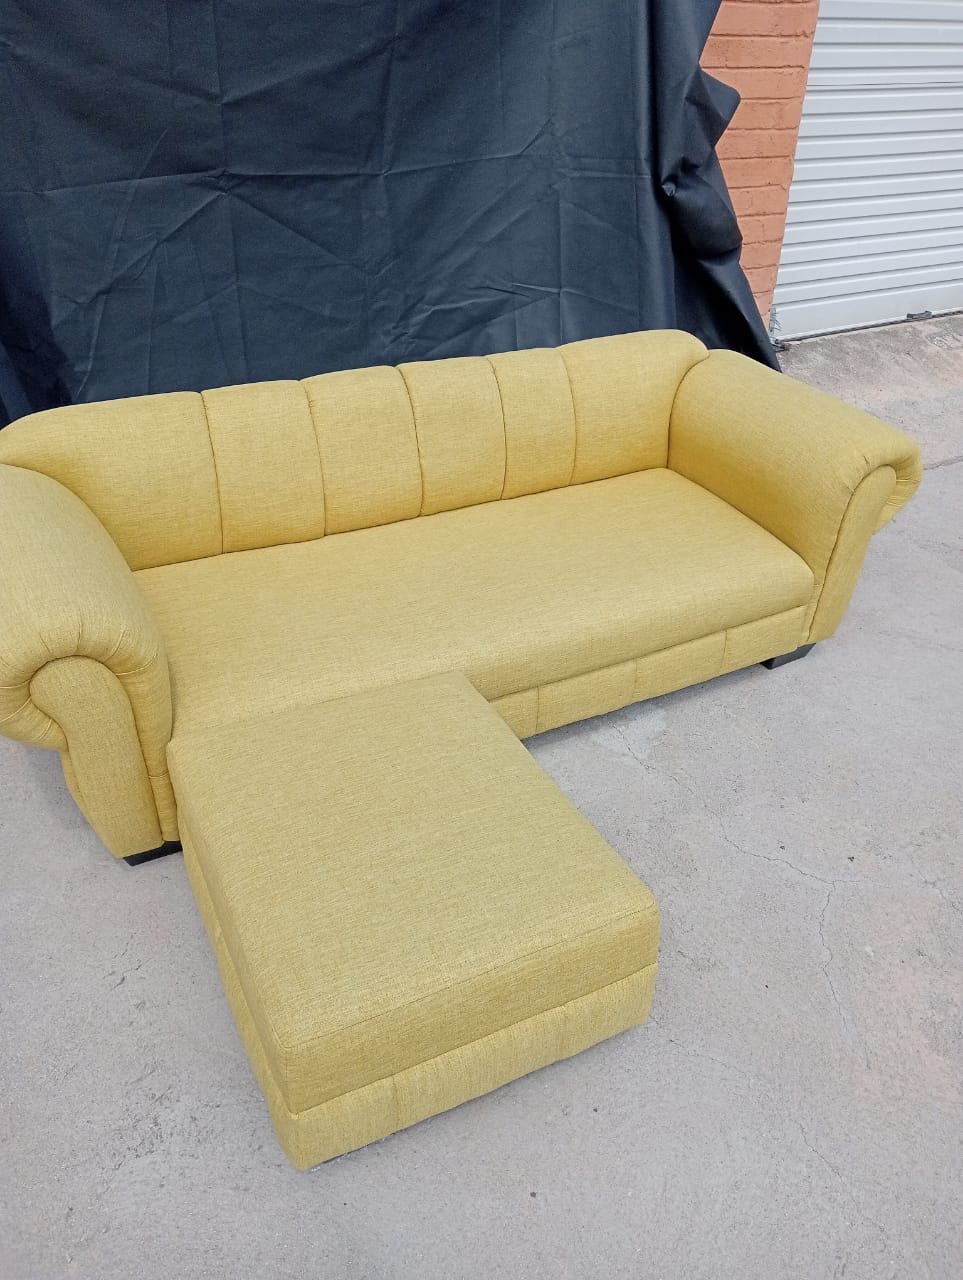 Couches for sale in Johannesburg